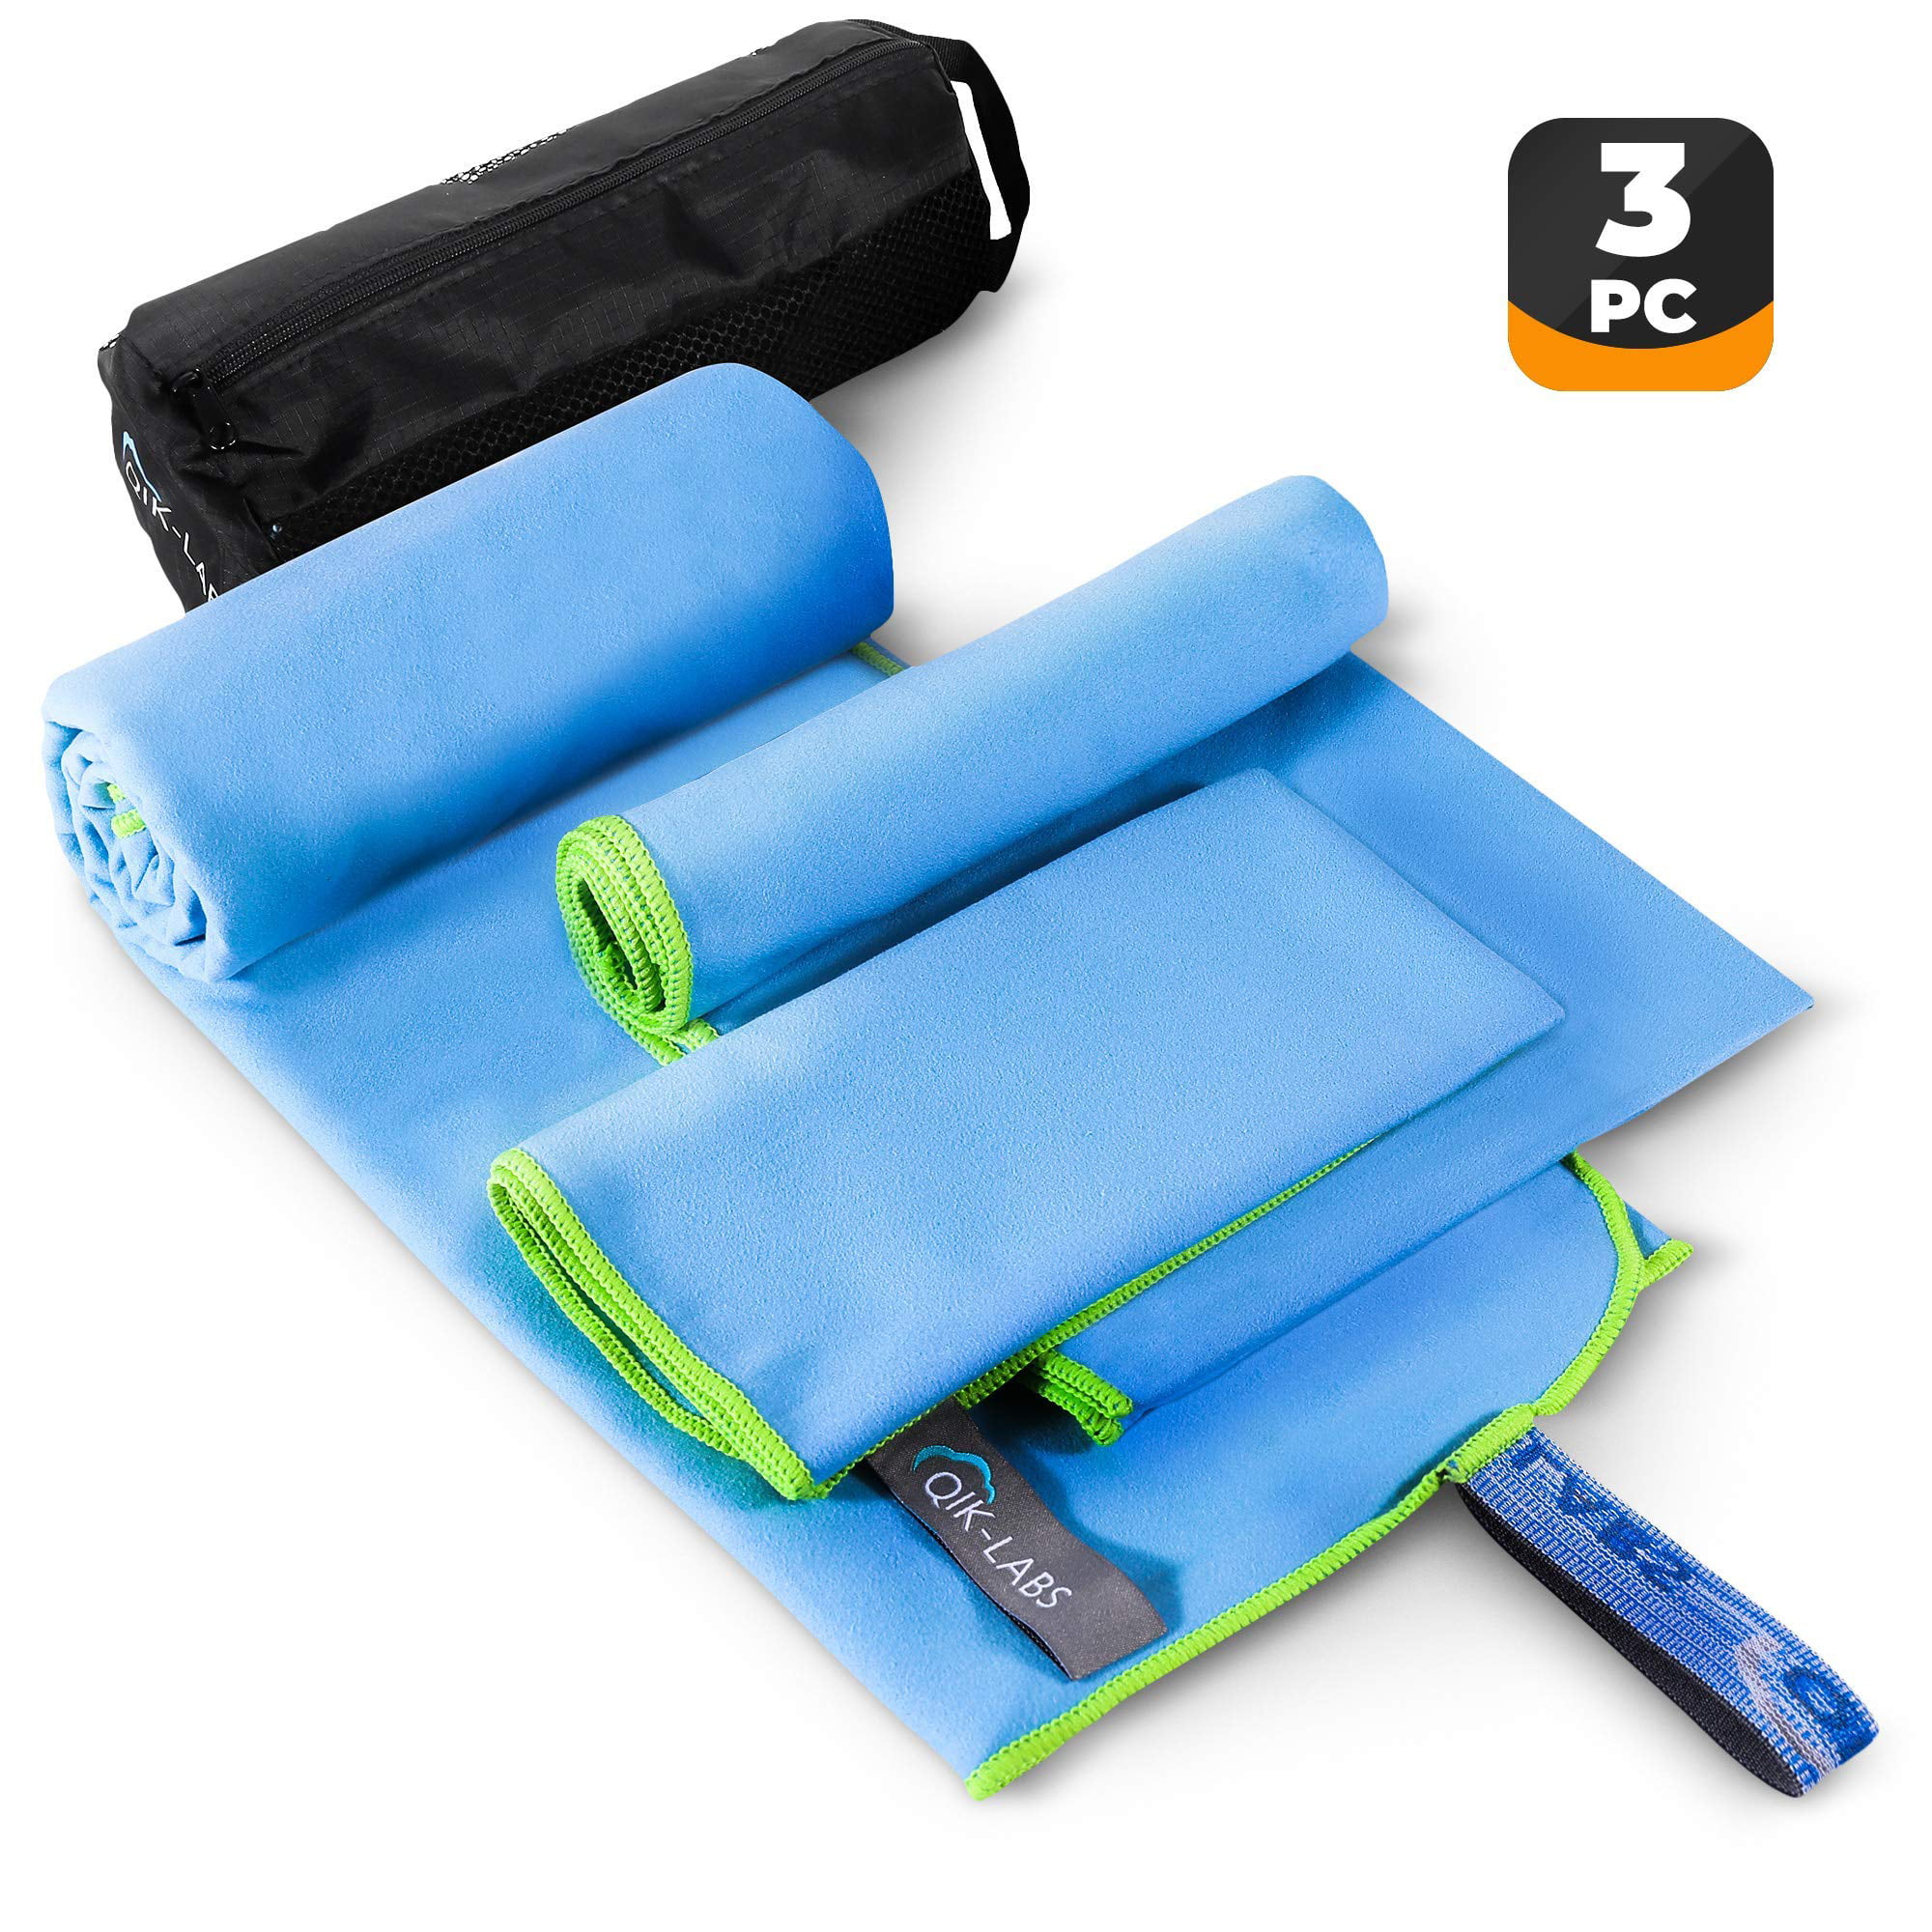 Soft Microfiber Travel Sports Towel 30 x 15 Inch with Portable Mesh Bag 